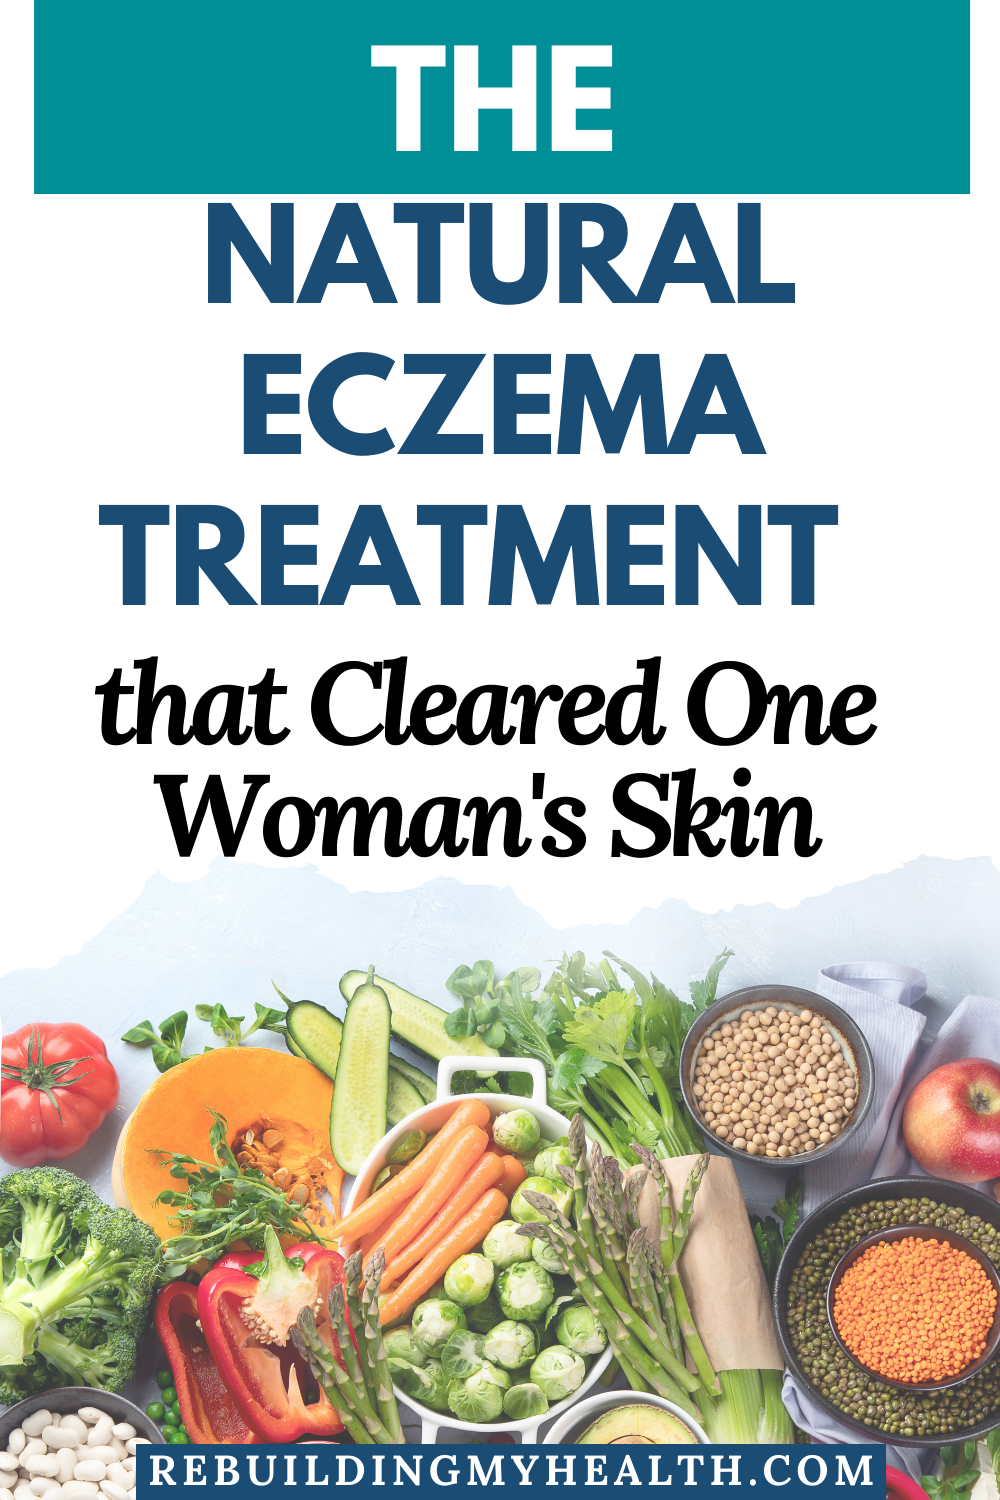 Learn about natural eczema treatment. For severe eczema, a British woman found relief through an unexpected mix of detox practices - including celery juice - and a vegan diet